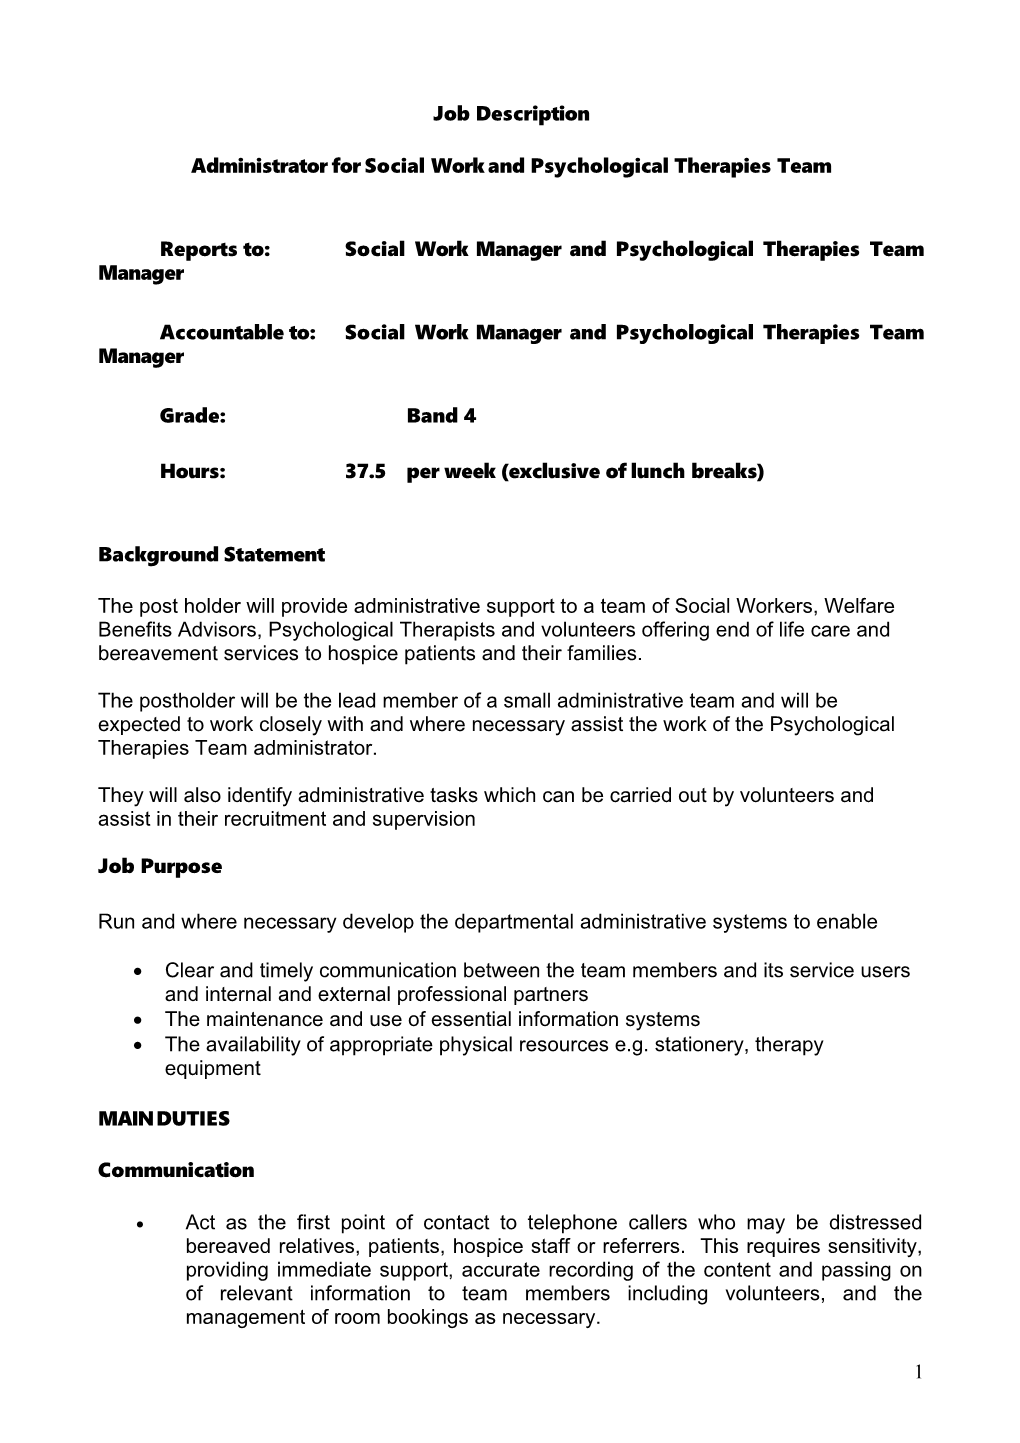 Administrator for Social Work and Psychological Therapies Team